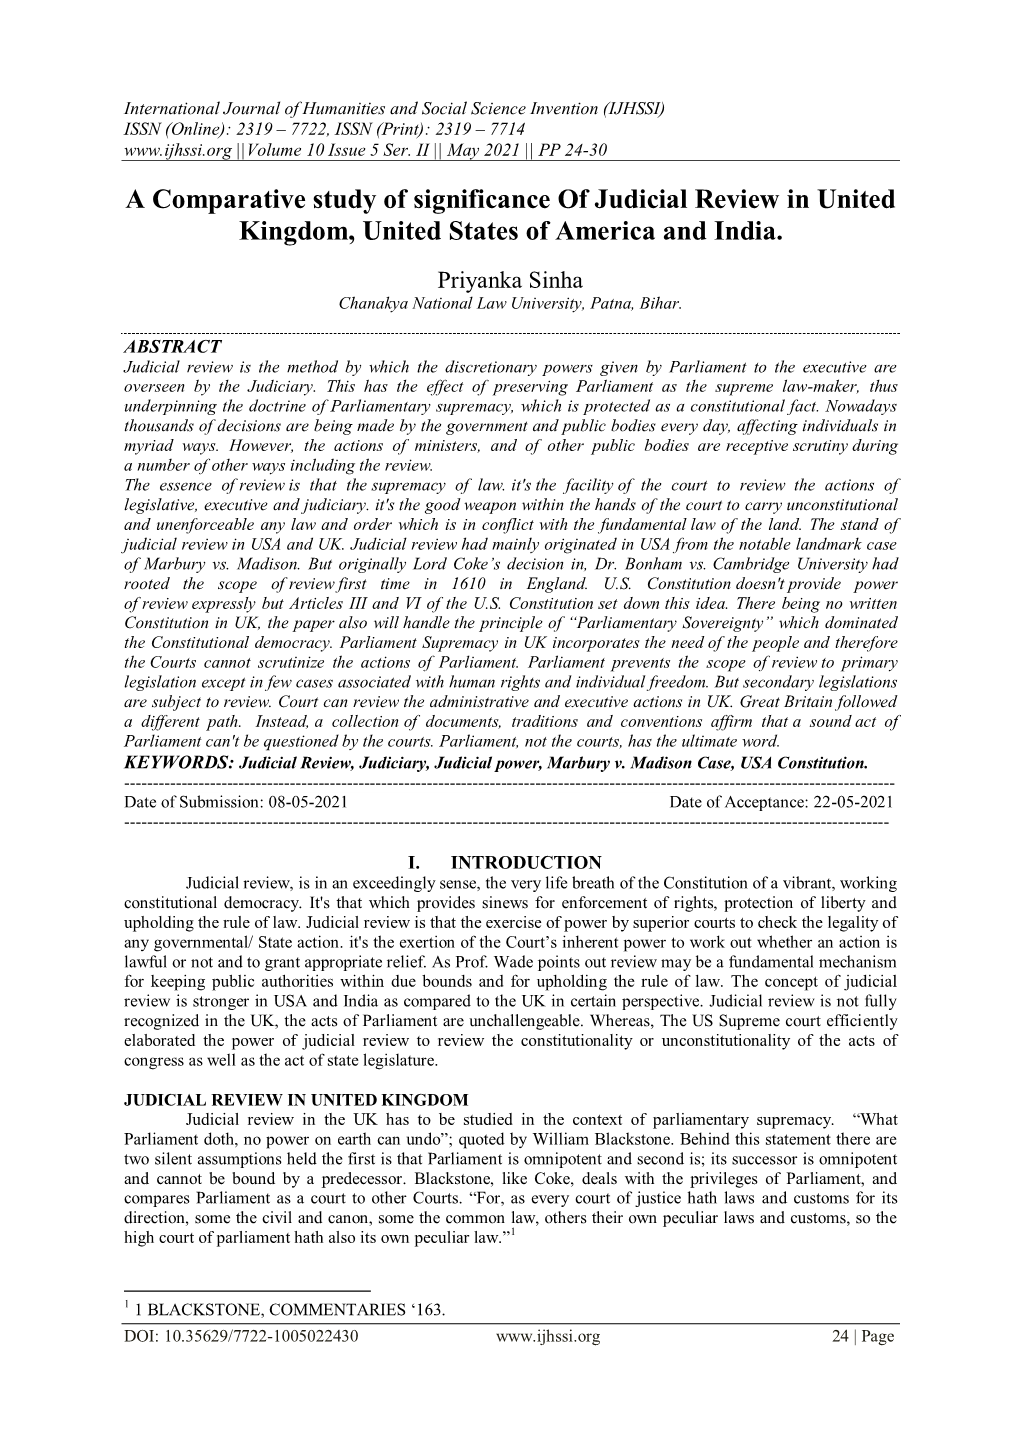 A Comparative Study of Significance of Judicial Review in United Kingdom, United States of America and India